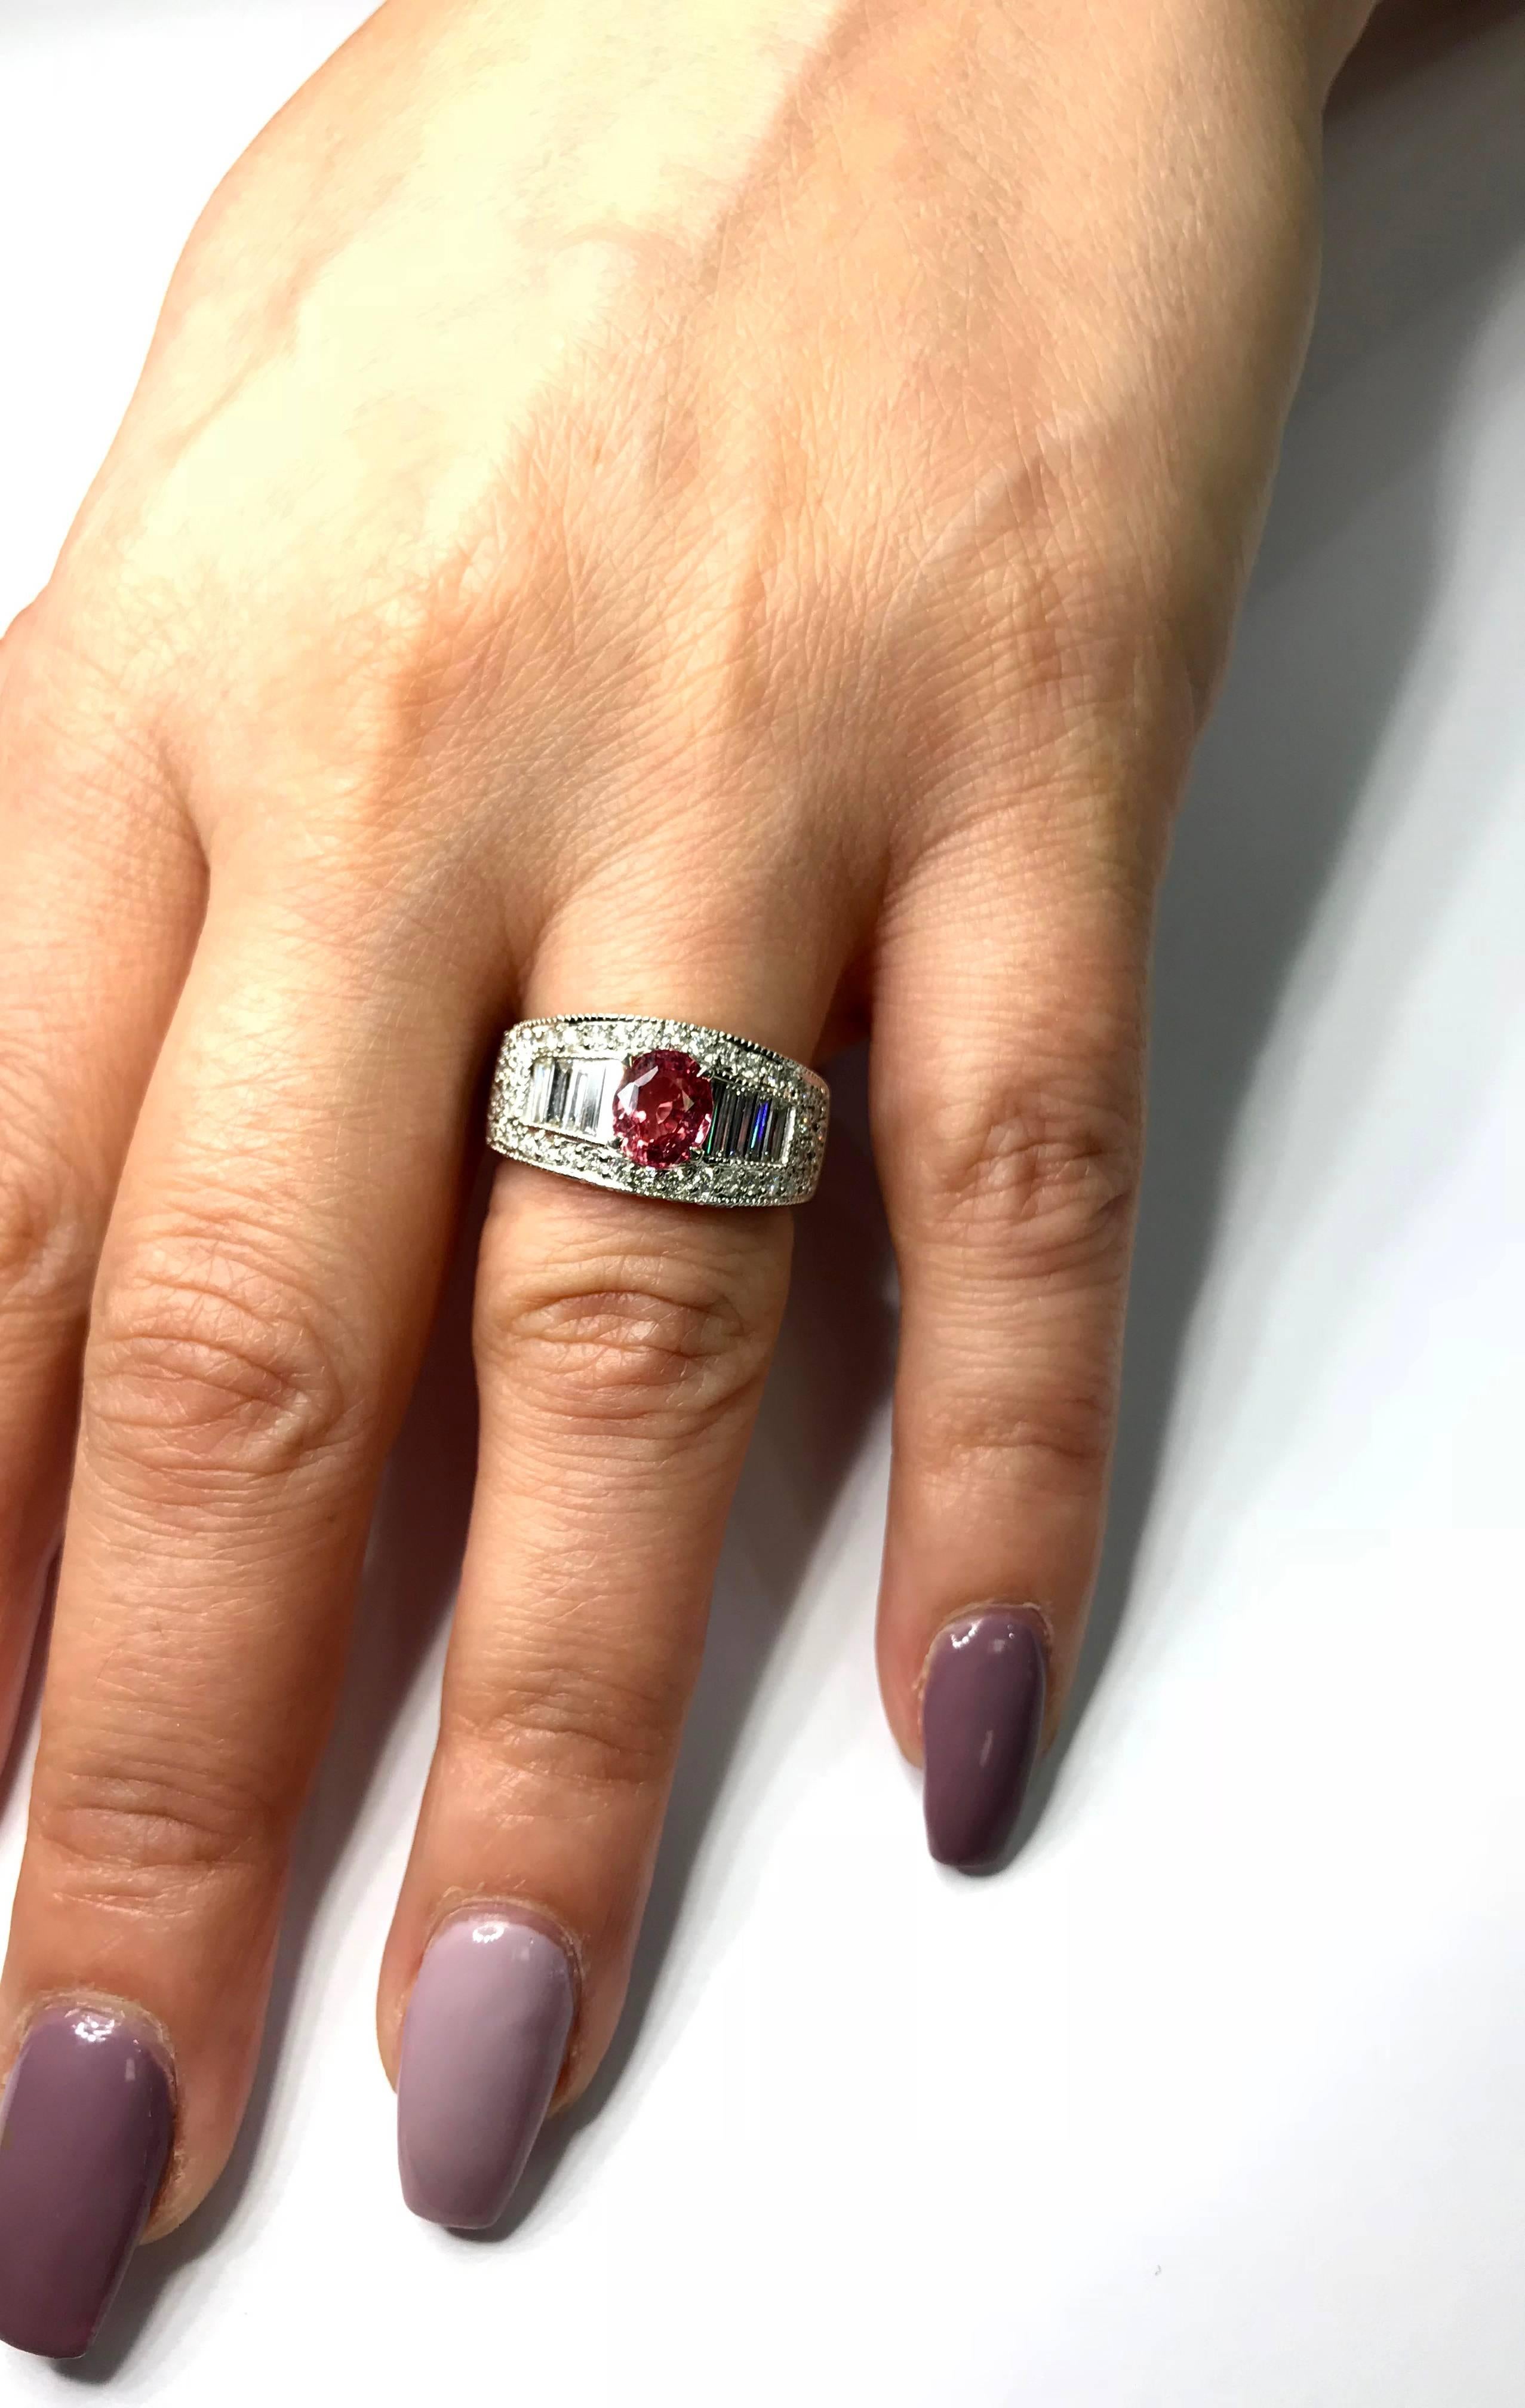 Platinum Ring with GIA Certified 1.25 Carat Padparadscha Sapphire

 Baguette and Round Diamonds set throughout entire ring. All done in Platinum.

Apprx. 0.70ct. Diamonds and apprx. 1.25ct. Baguette Diamonds

GIA Report #: 2258006446. Sapphire has